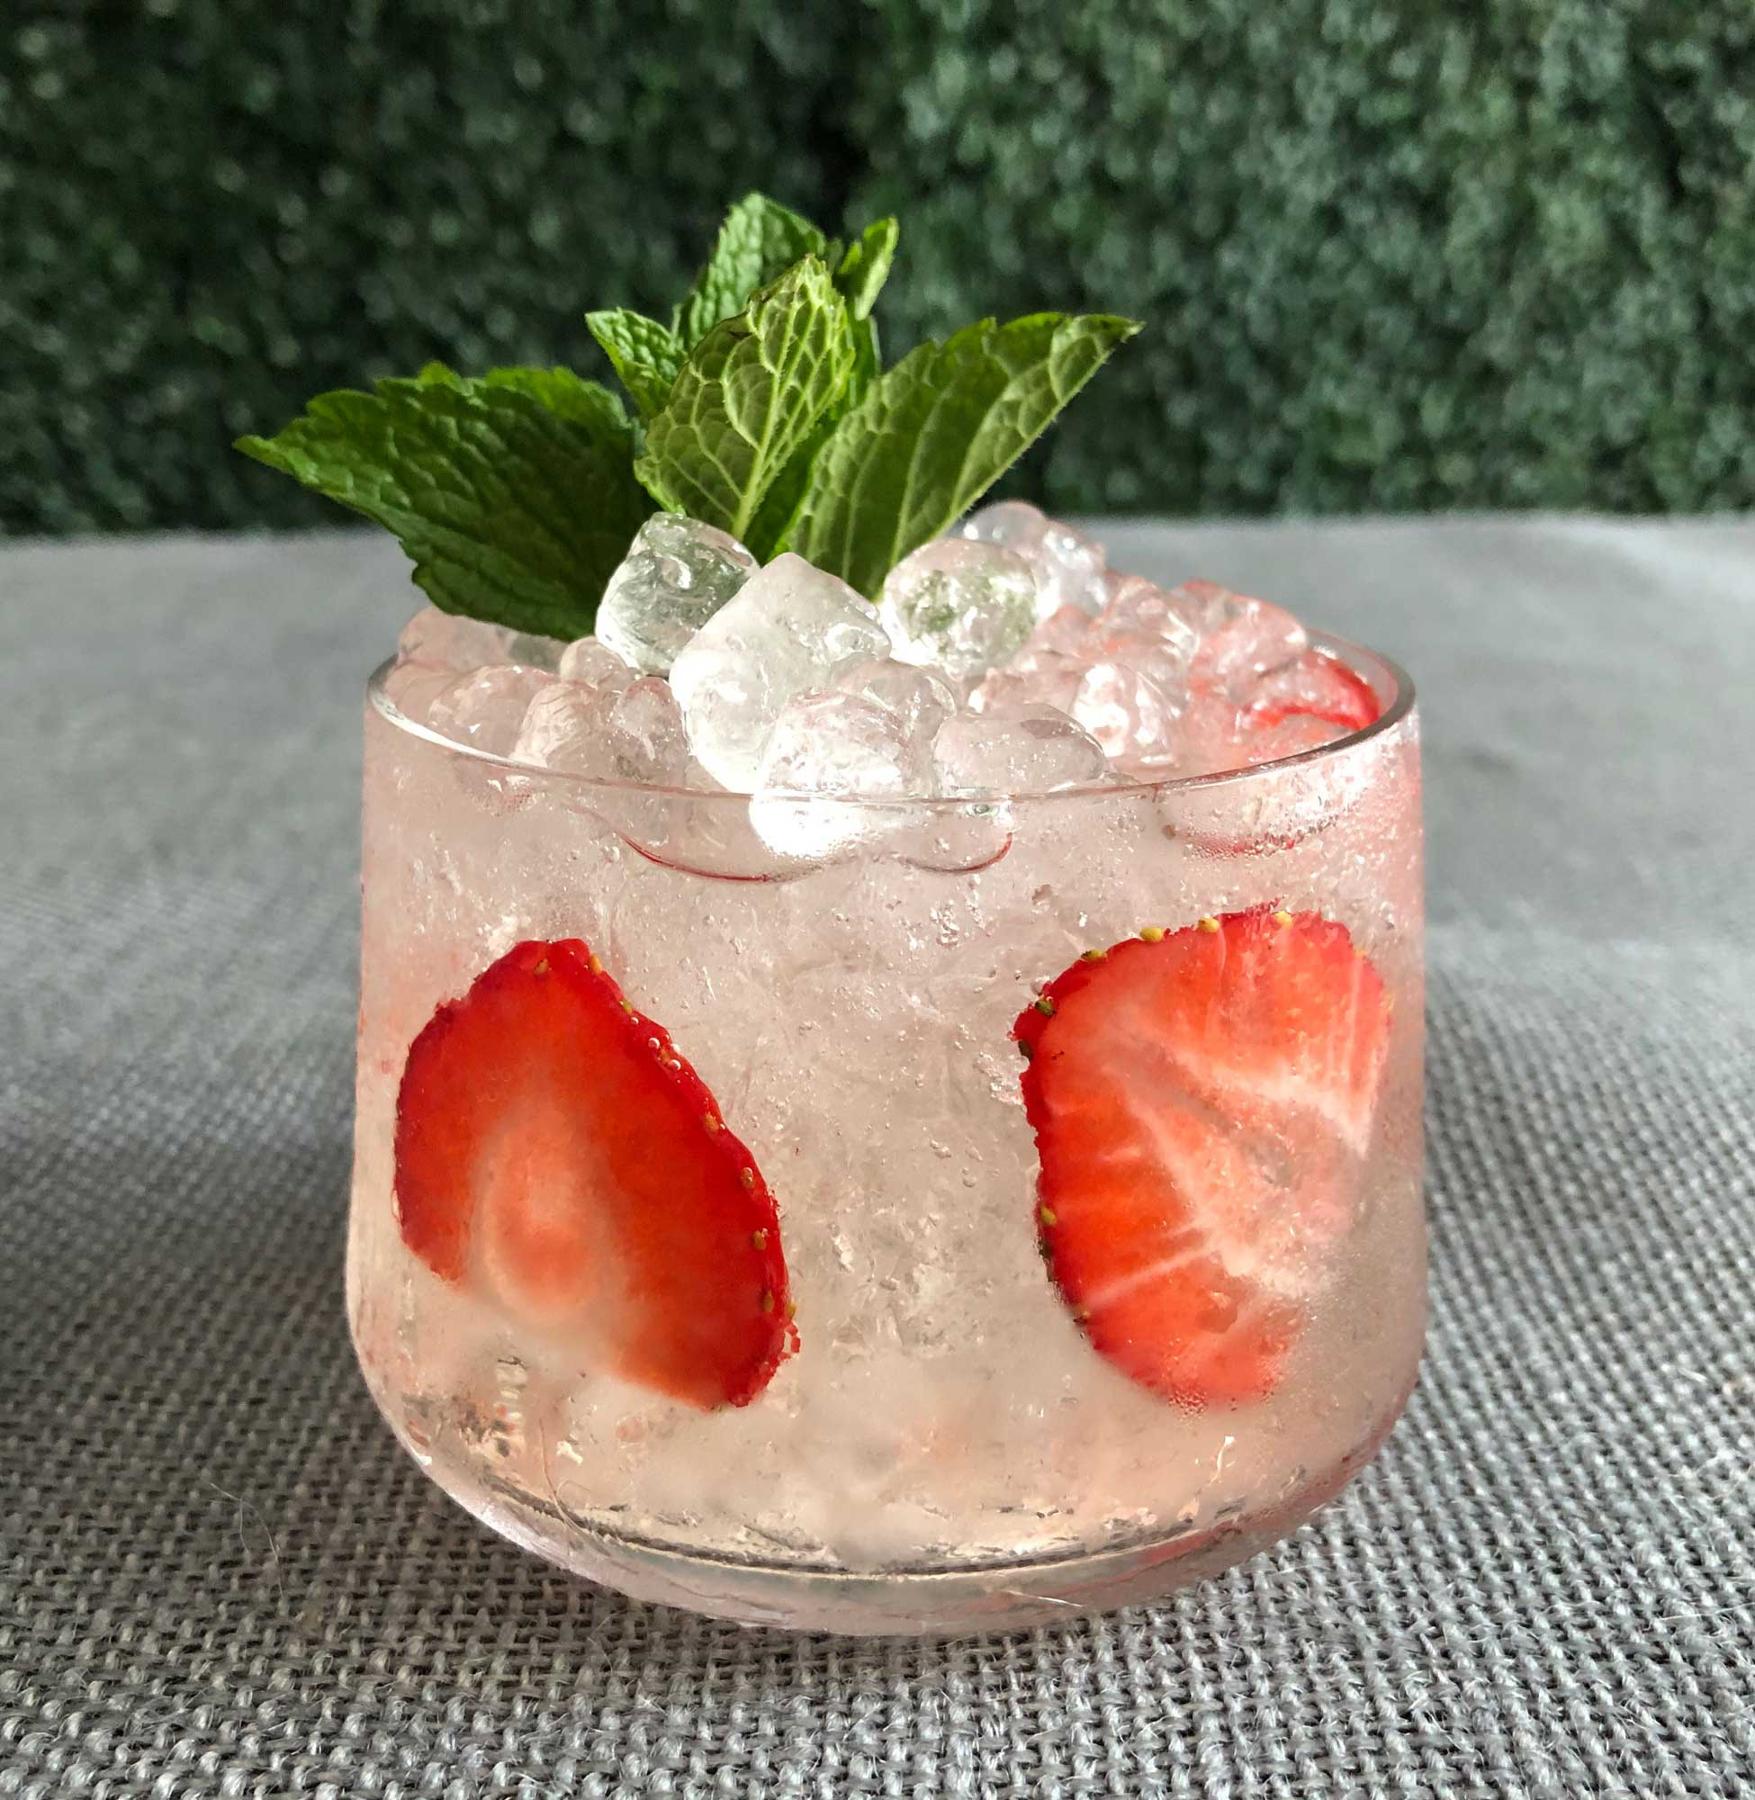 An example of the Savoie Spritz, the mixed drink (drink) featuring Comoz Blanc Vermouth de Chambèry, soda water, strawberry, lemon twist, and sprig of mint; photo by Lee Edwards